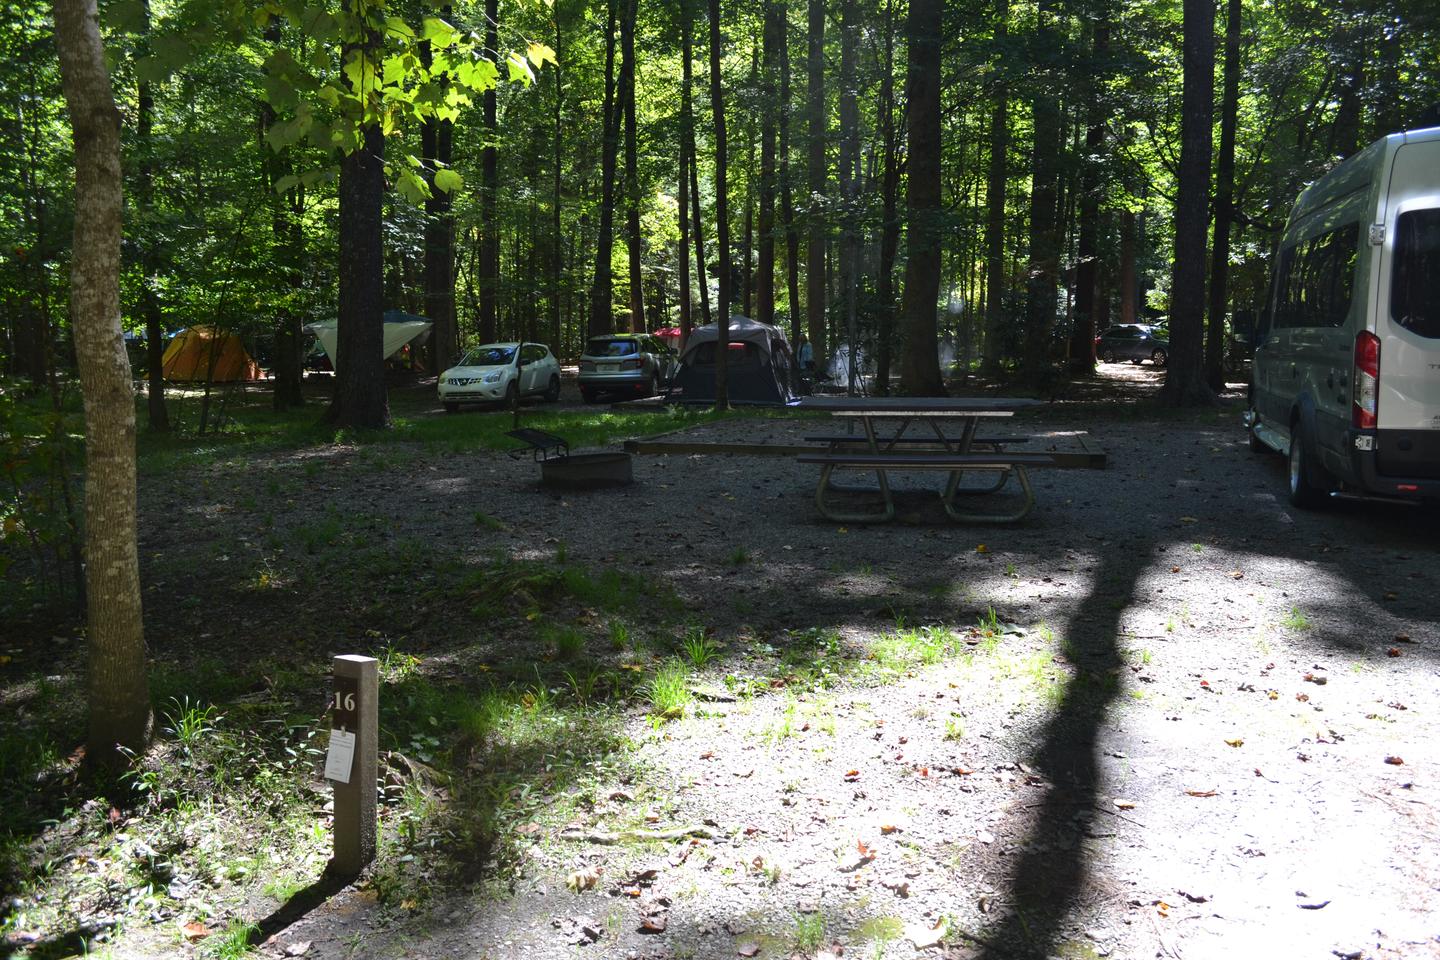 Cataloochee Campground Site 16Parking area with picnic table and tent pad in shade